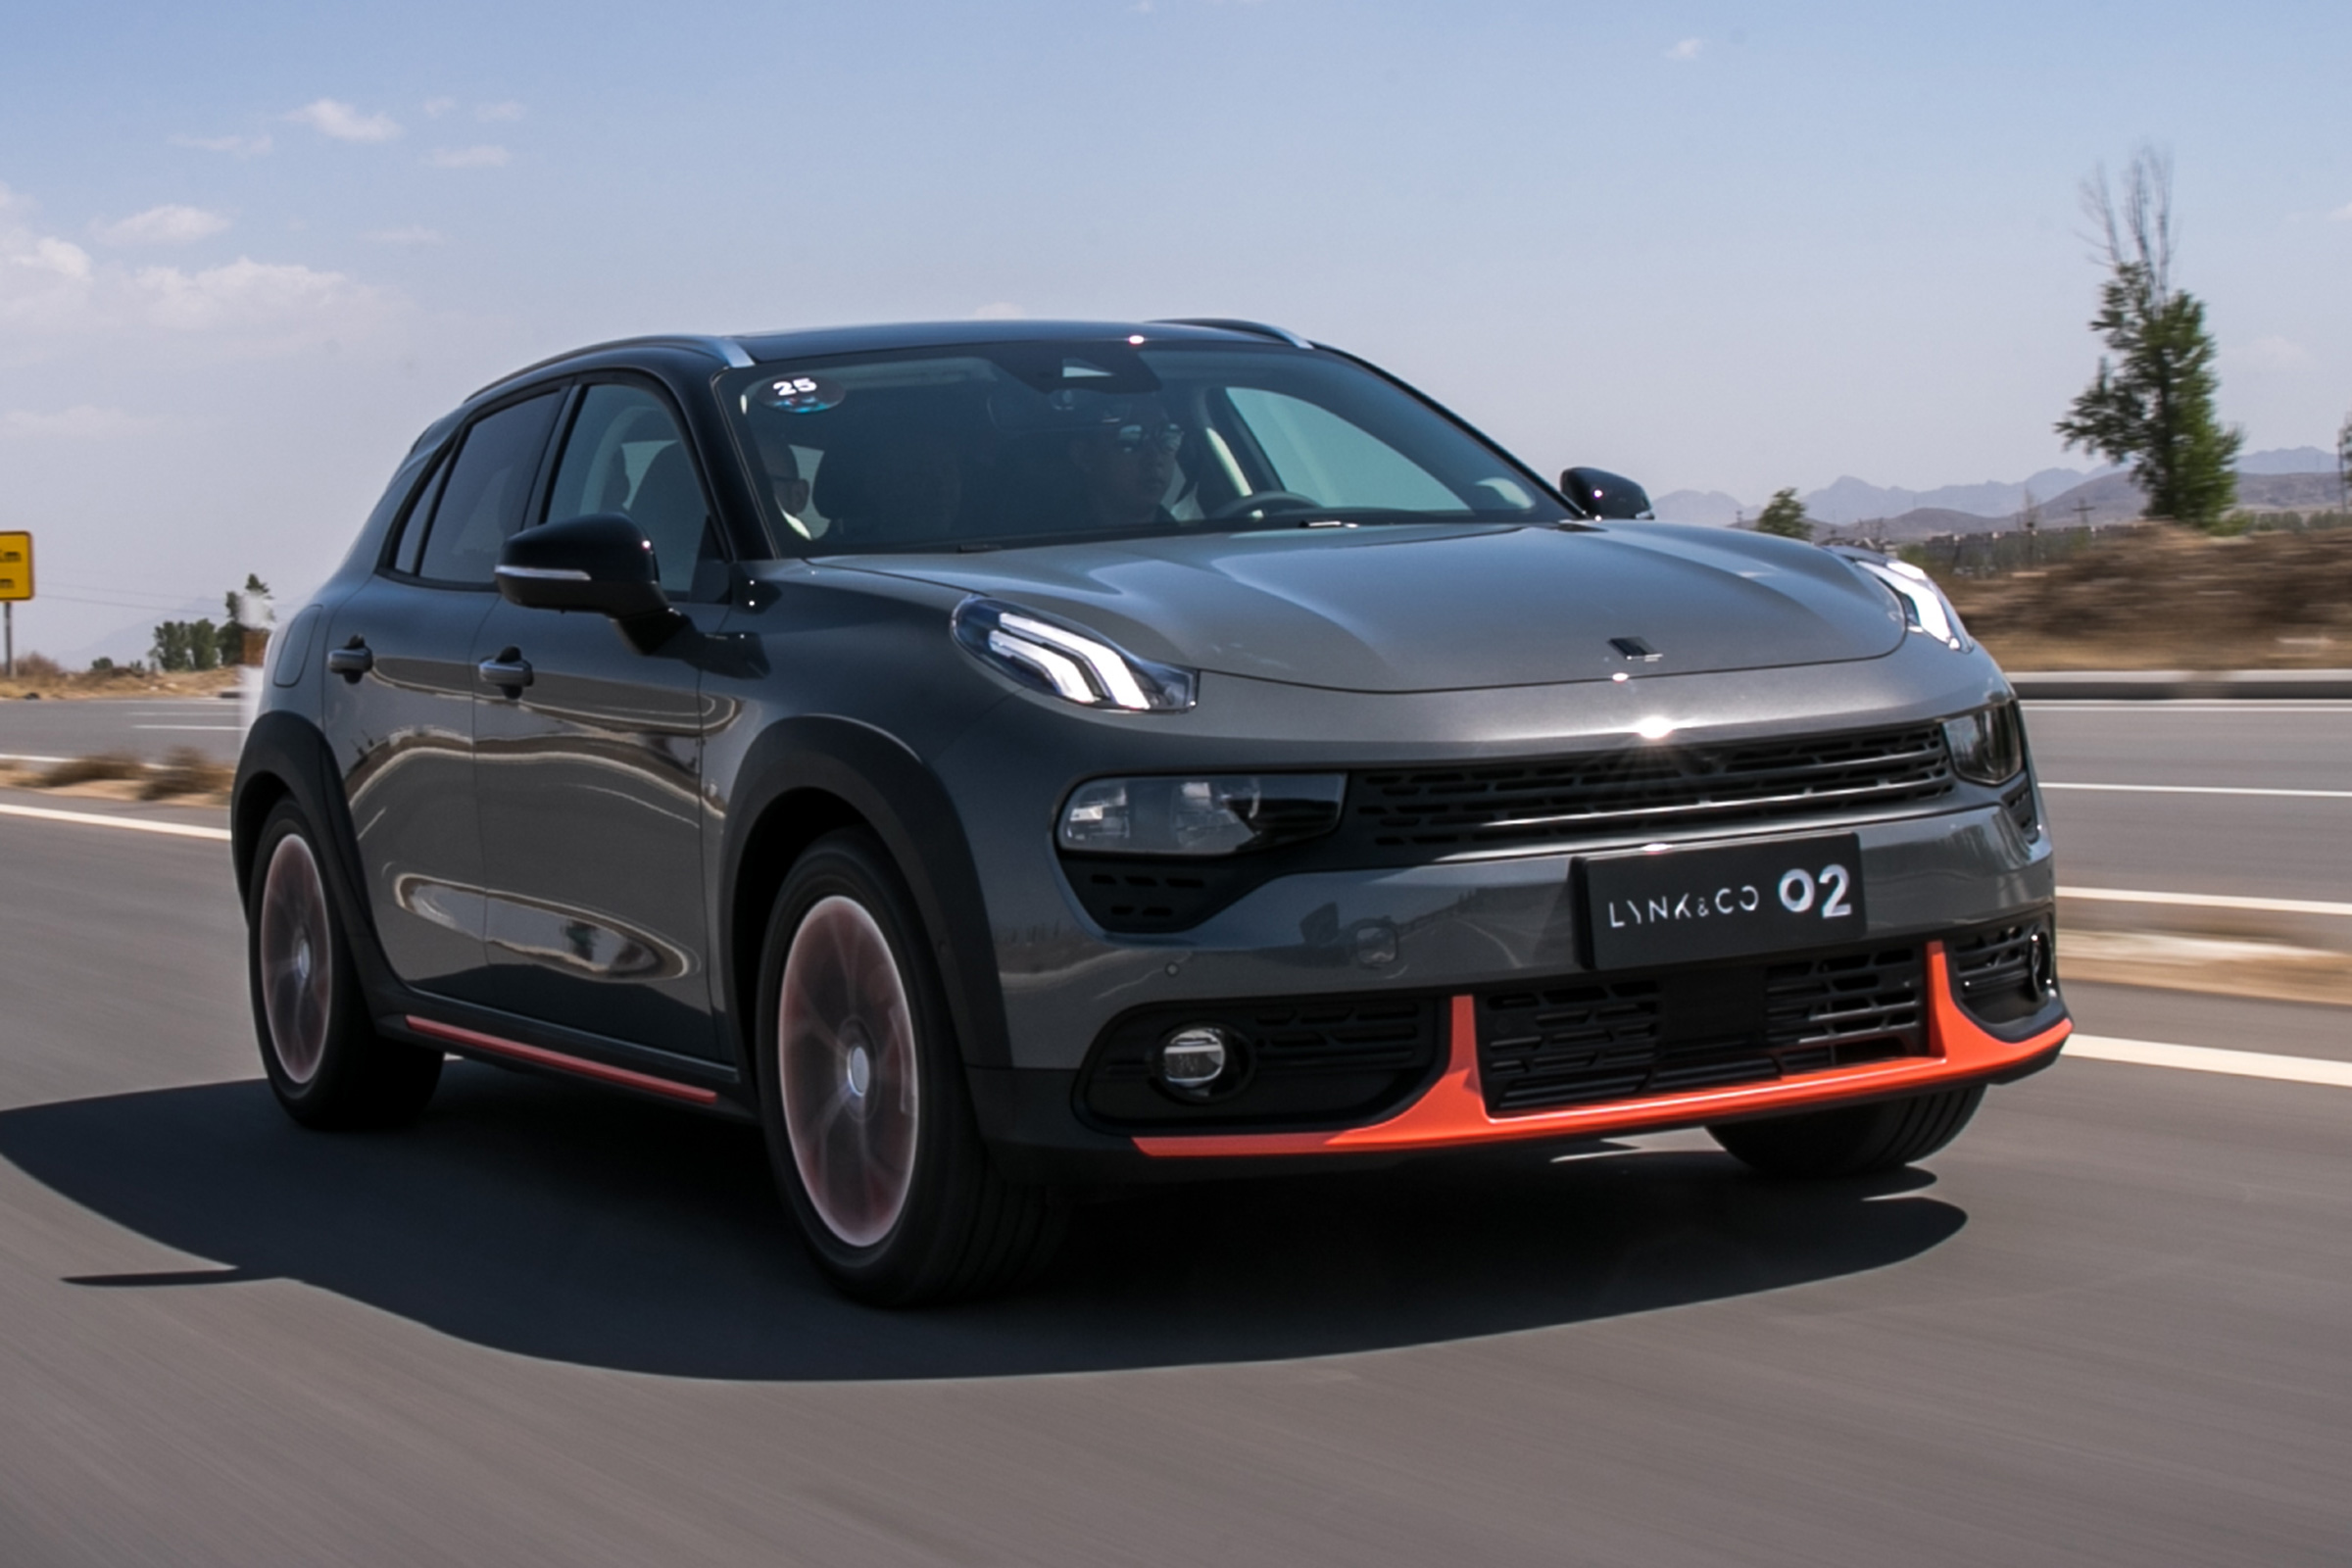 lynk-co-02-suv-review-auto-express